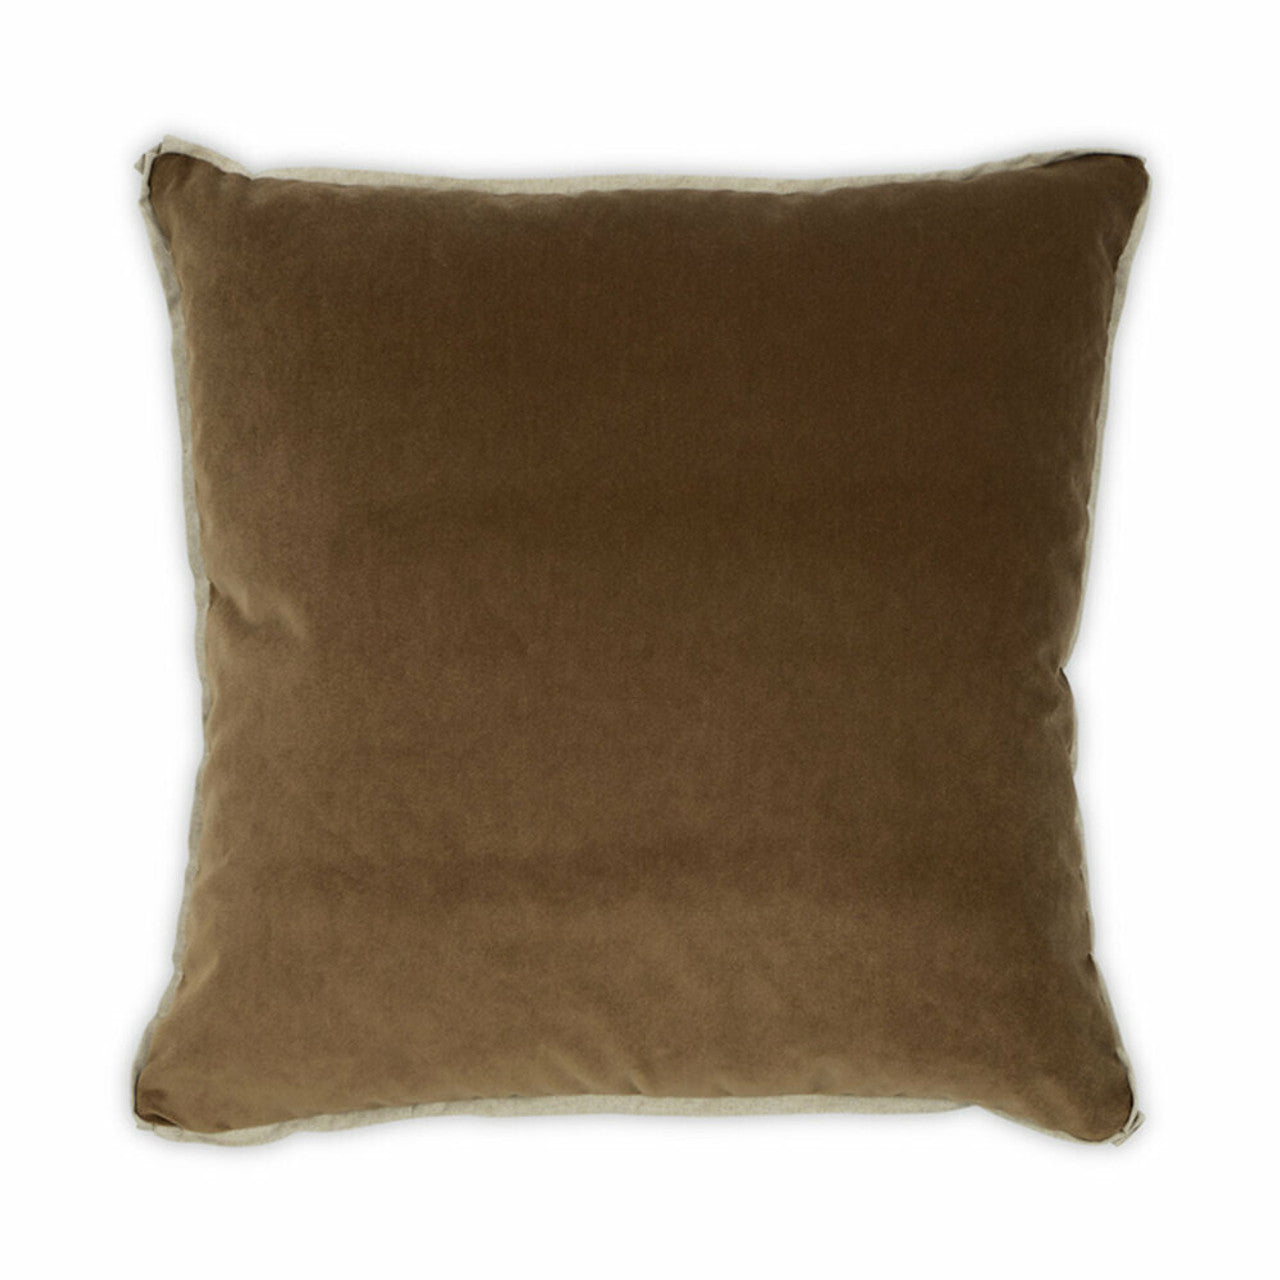 Banks Pillow in Toffee